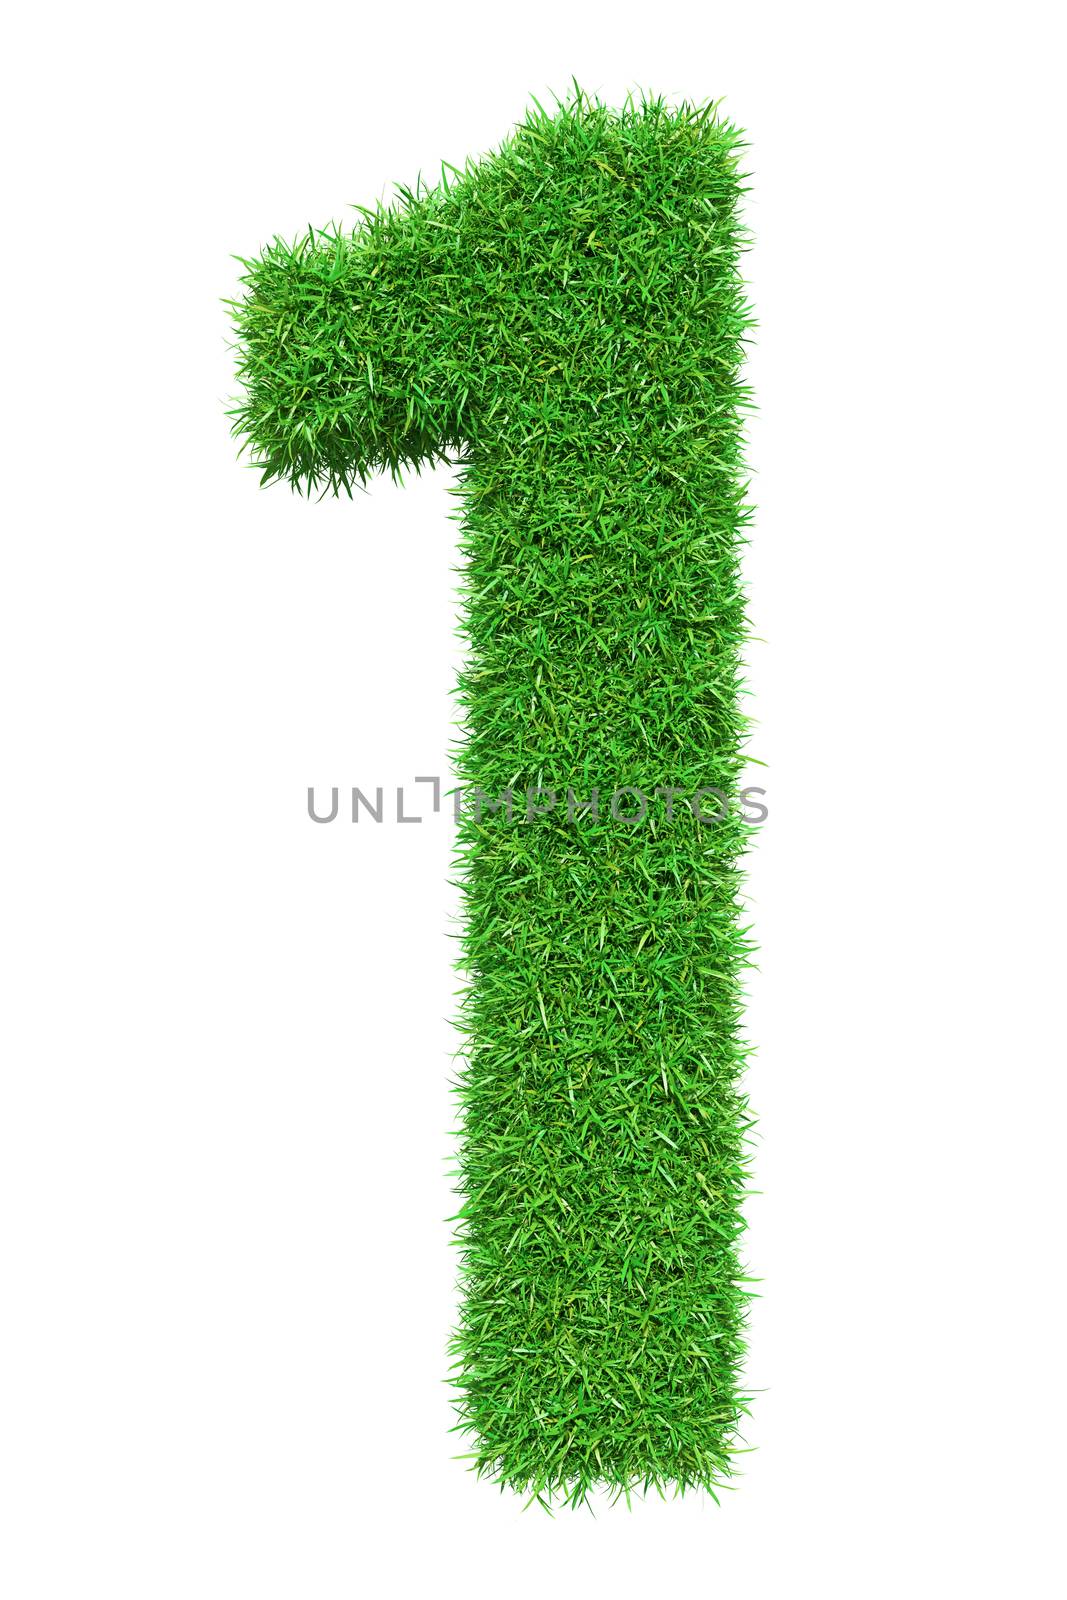 Green grass number 1 by cherezoff